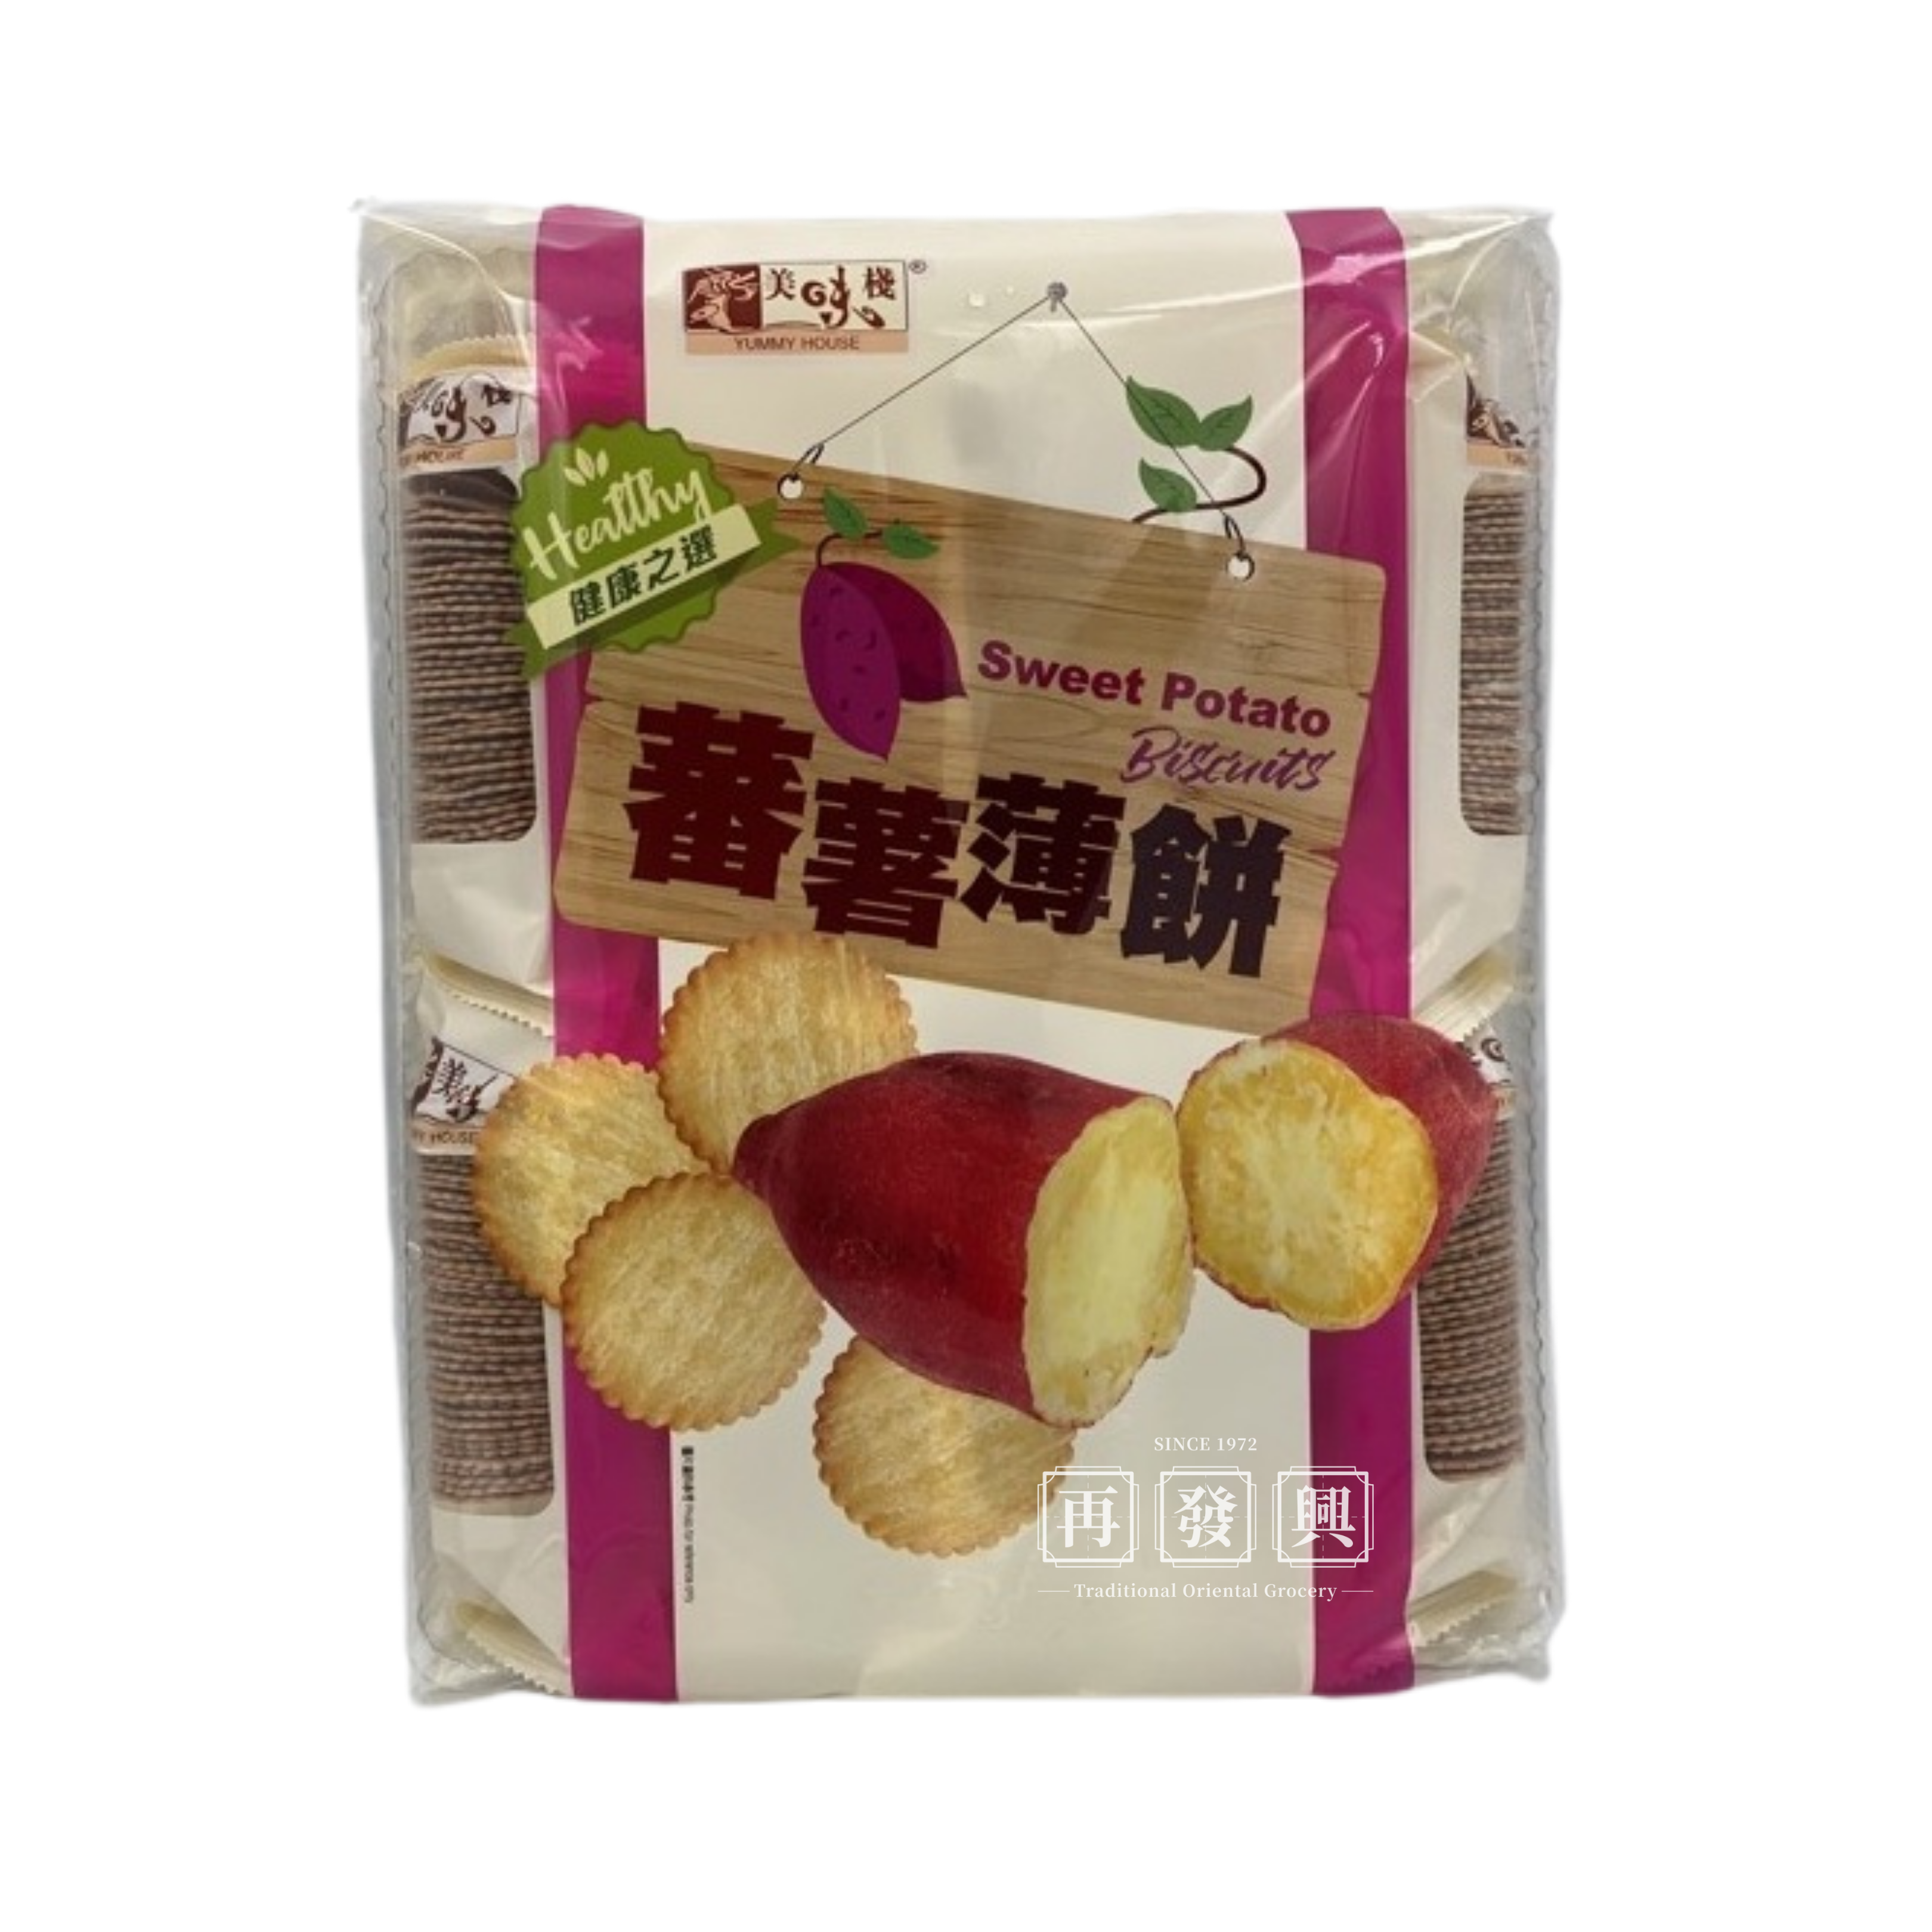 Yummy House Sweet Potato Biscuits 300g